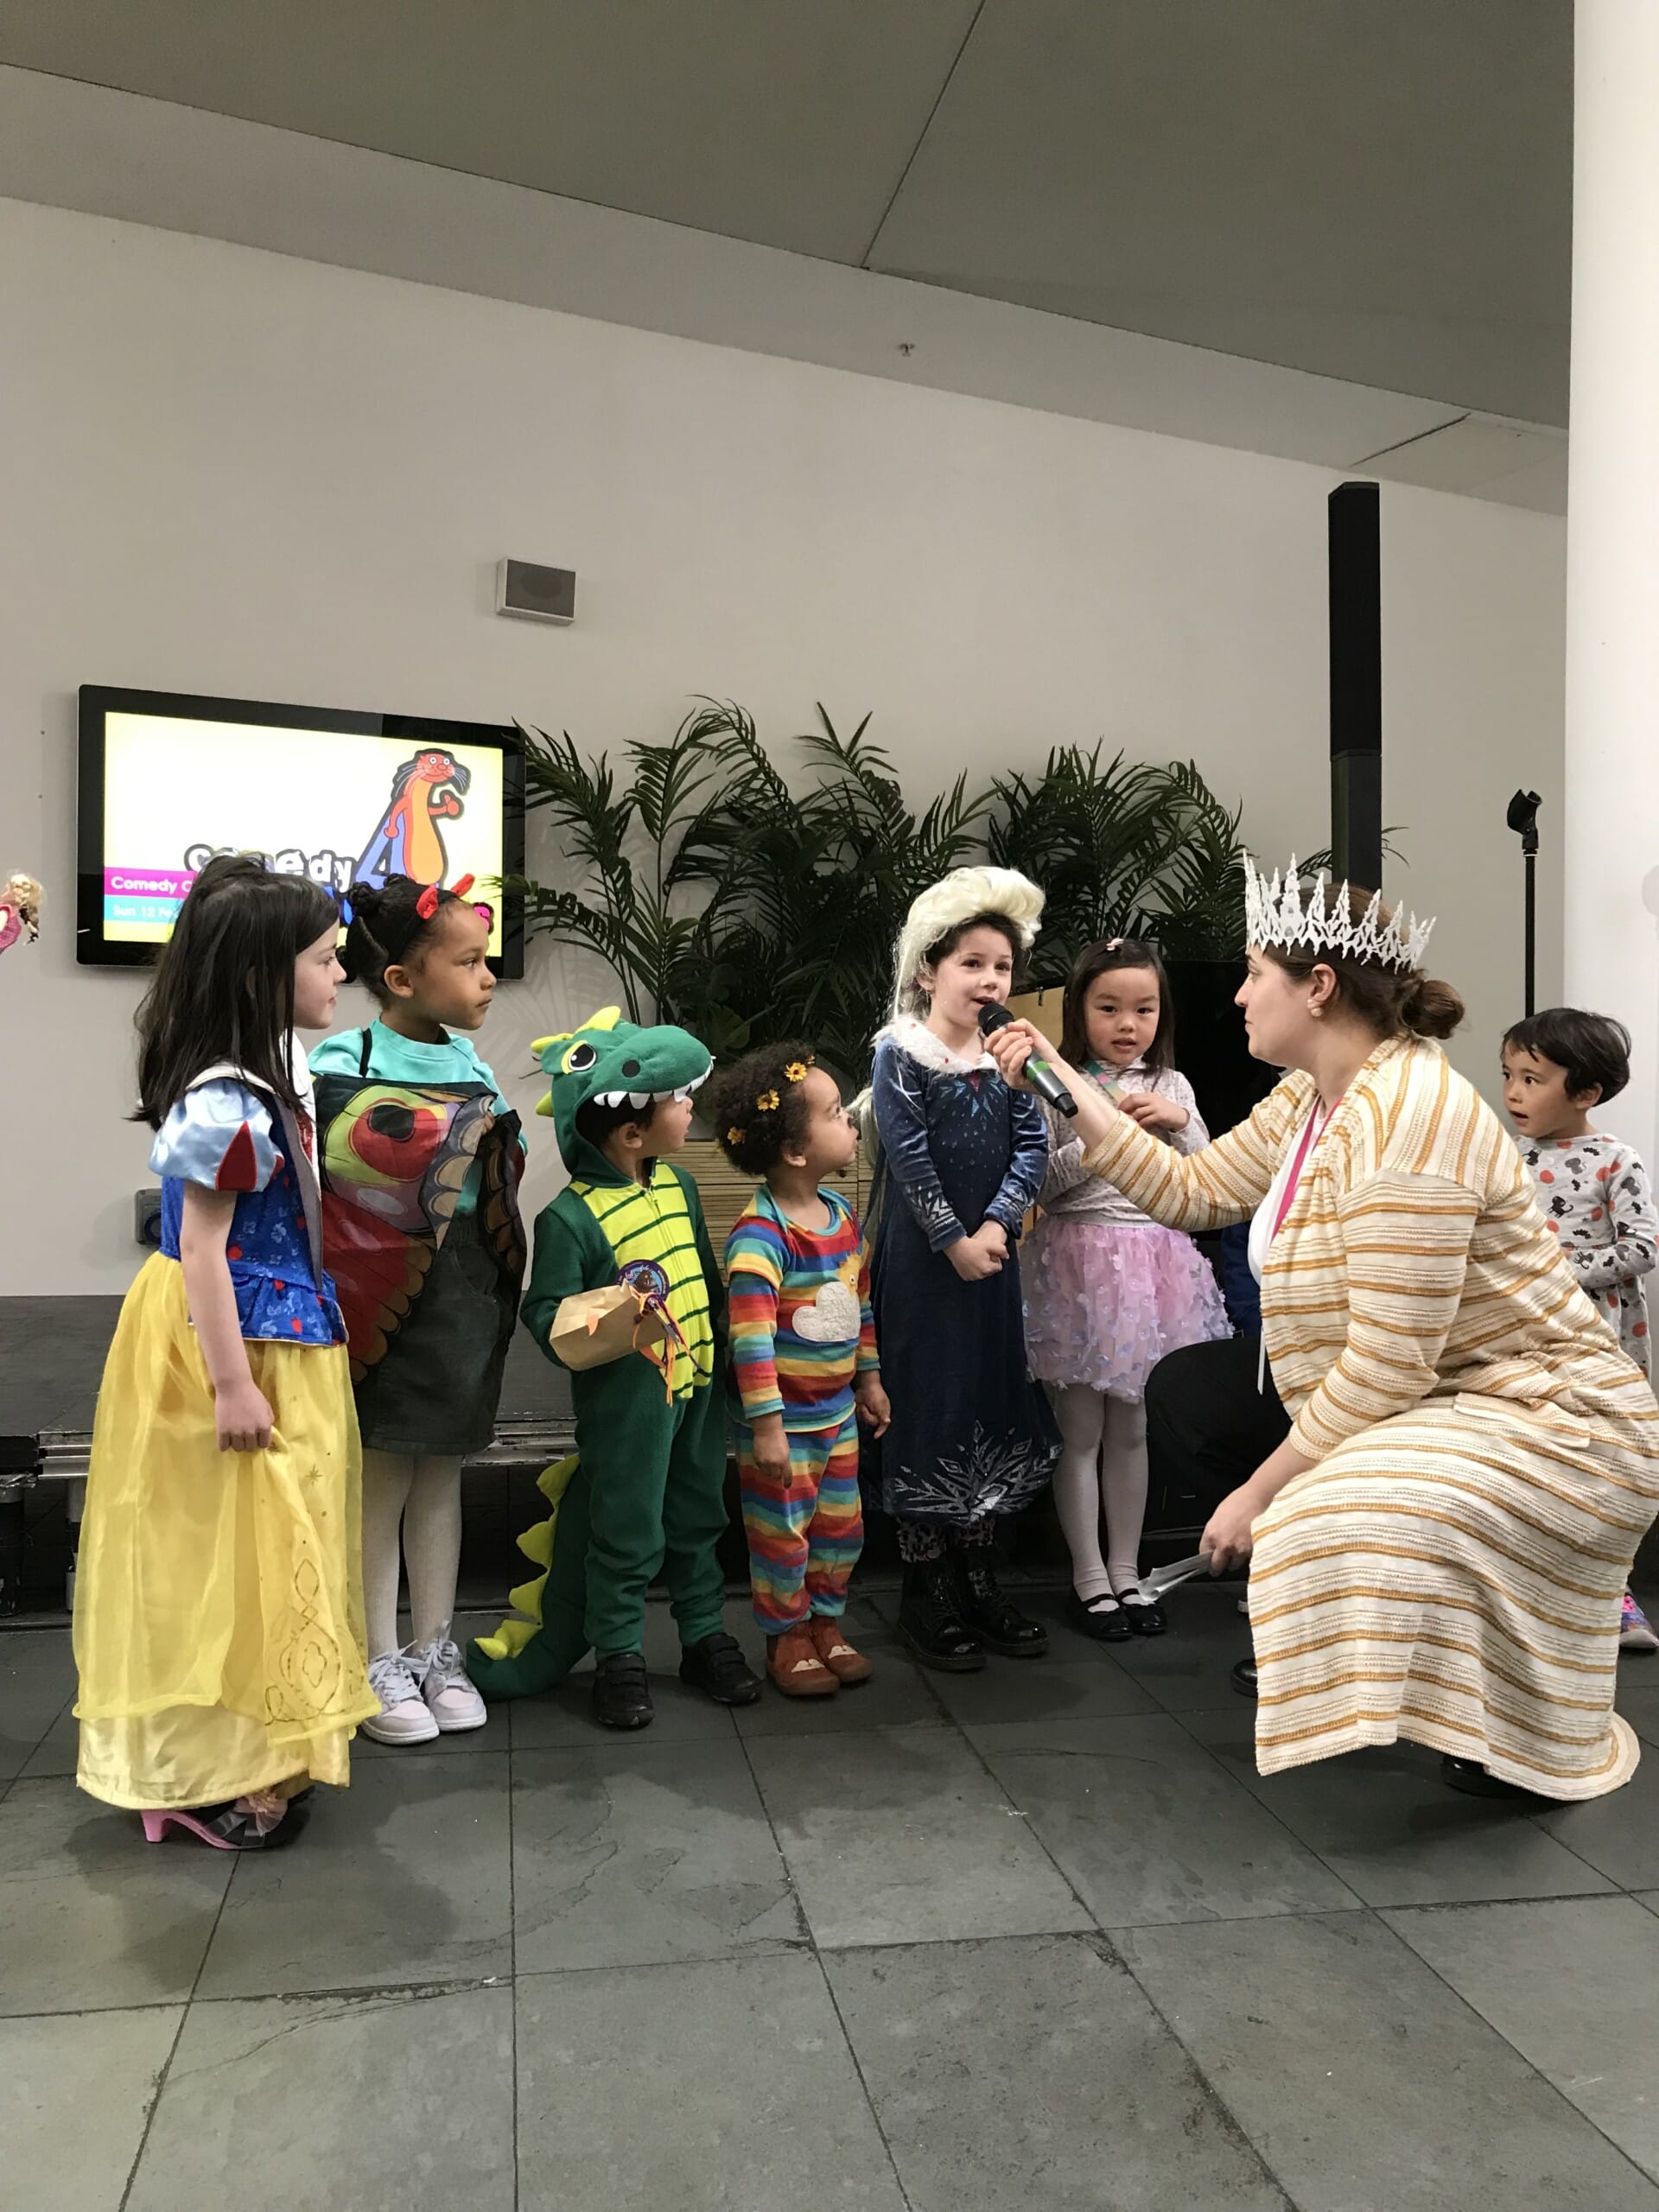 A group of children in colourful costumes in artsdepot's costume parade! Costumes include Snow White, the very hungry caterpillar, Queen Elsa, a crocodile, and more!